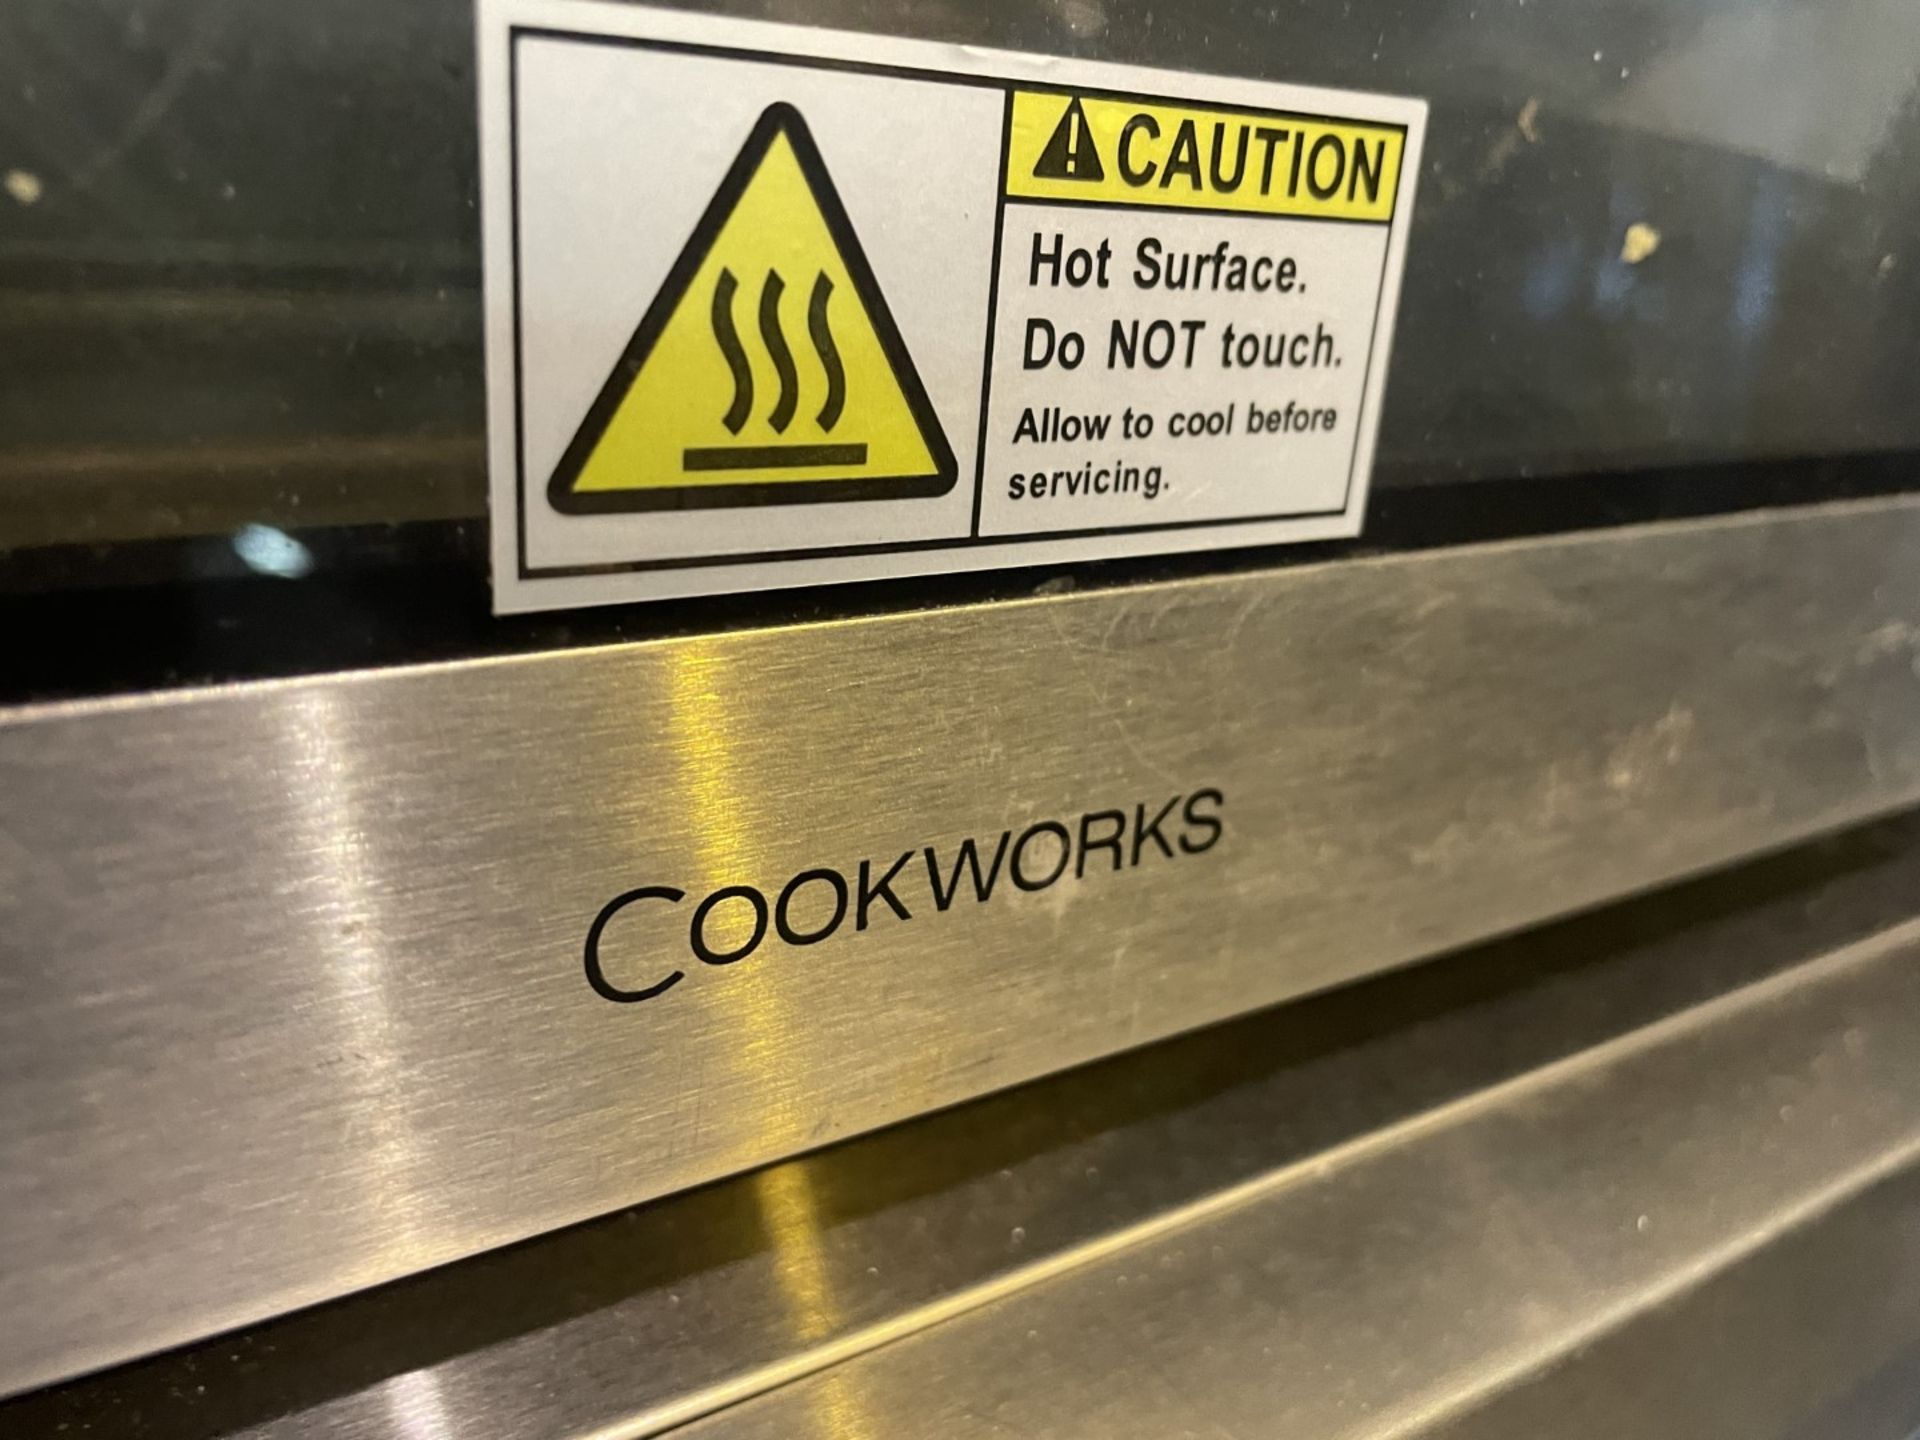 1 x Cookworks Stainless Steel Electric Mini Oven 1500W 23L - Image 4 of 4